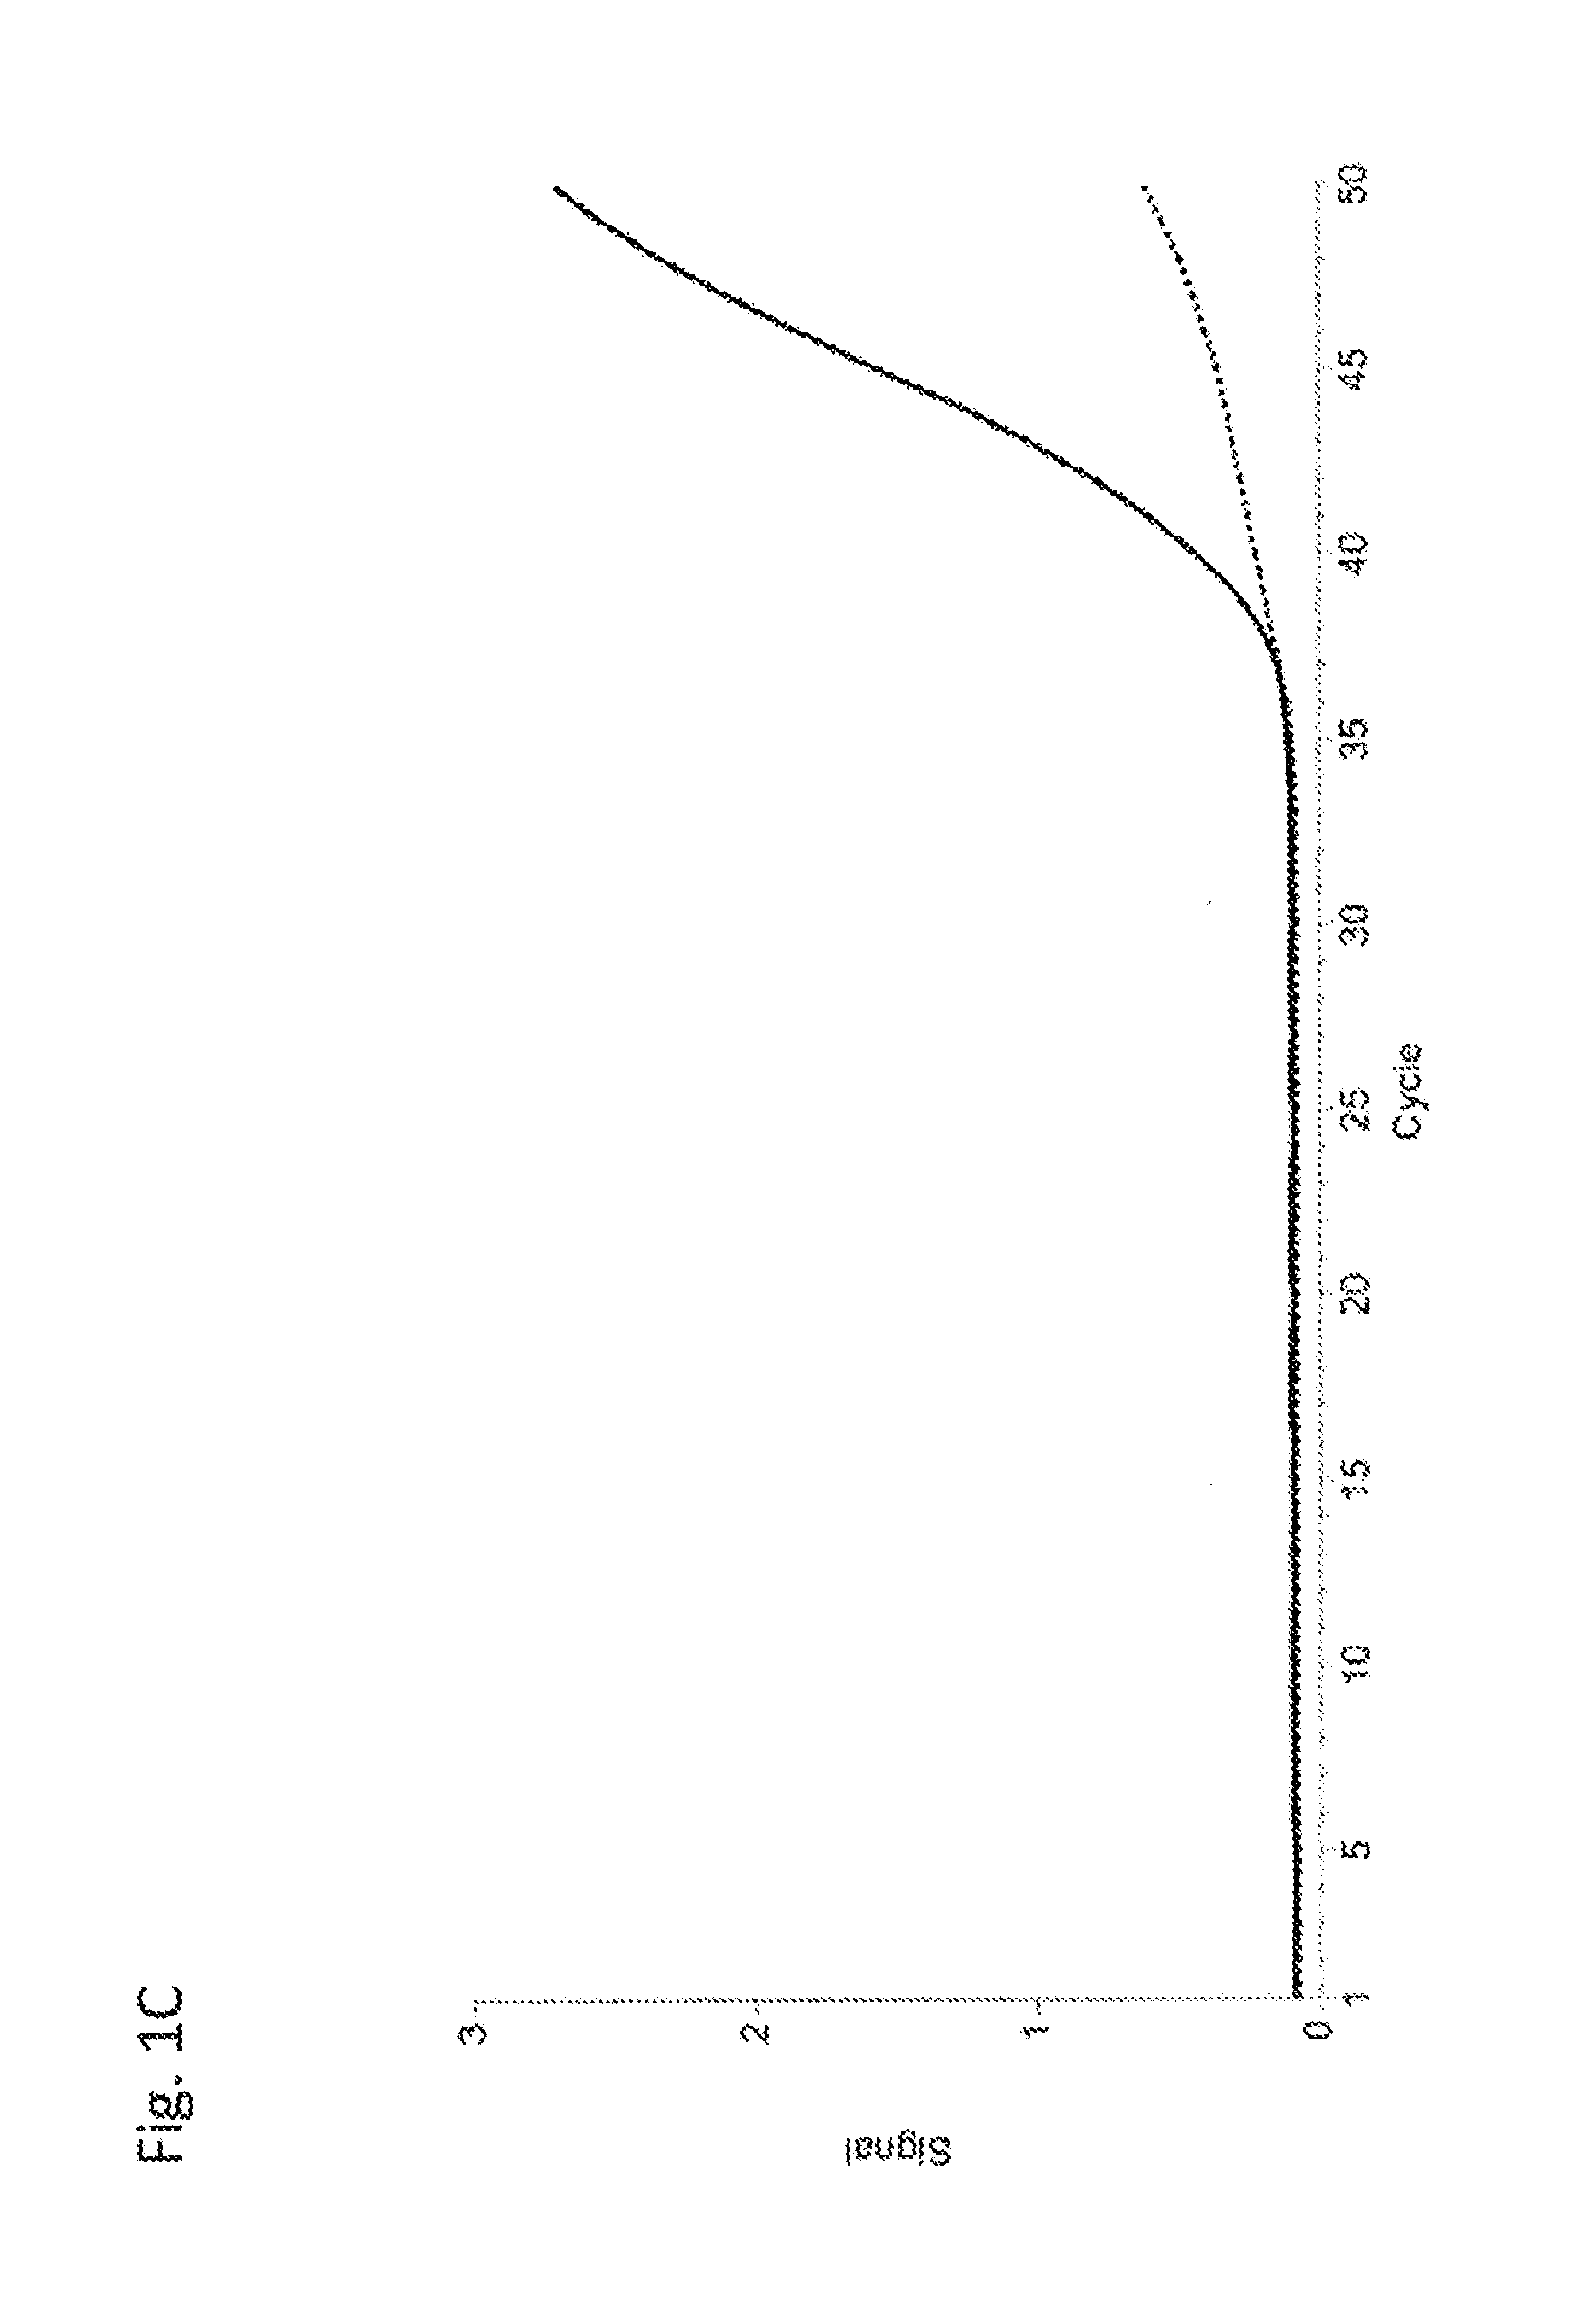 Amine Compounds for the Selective Preparation of Biological Samples